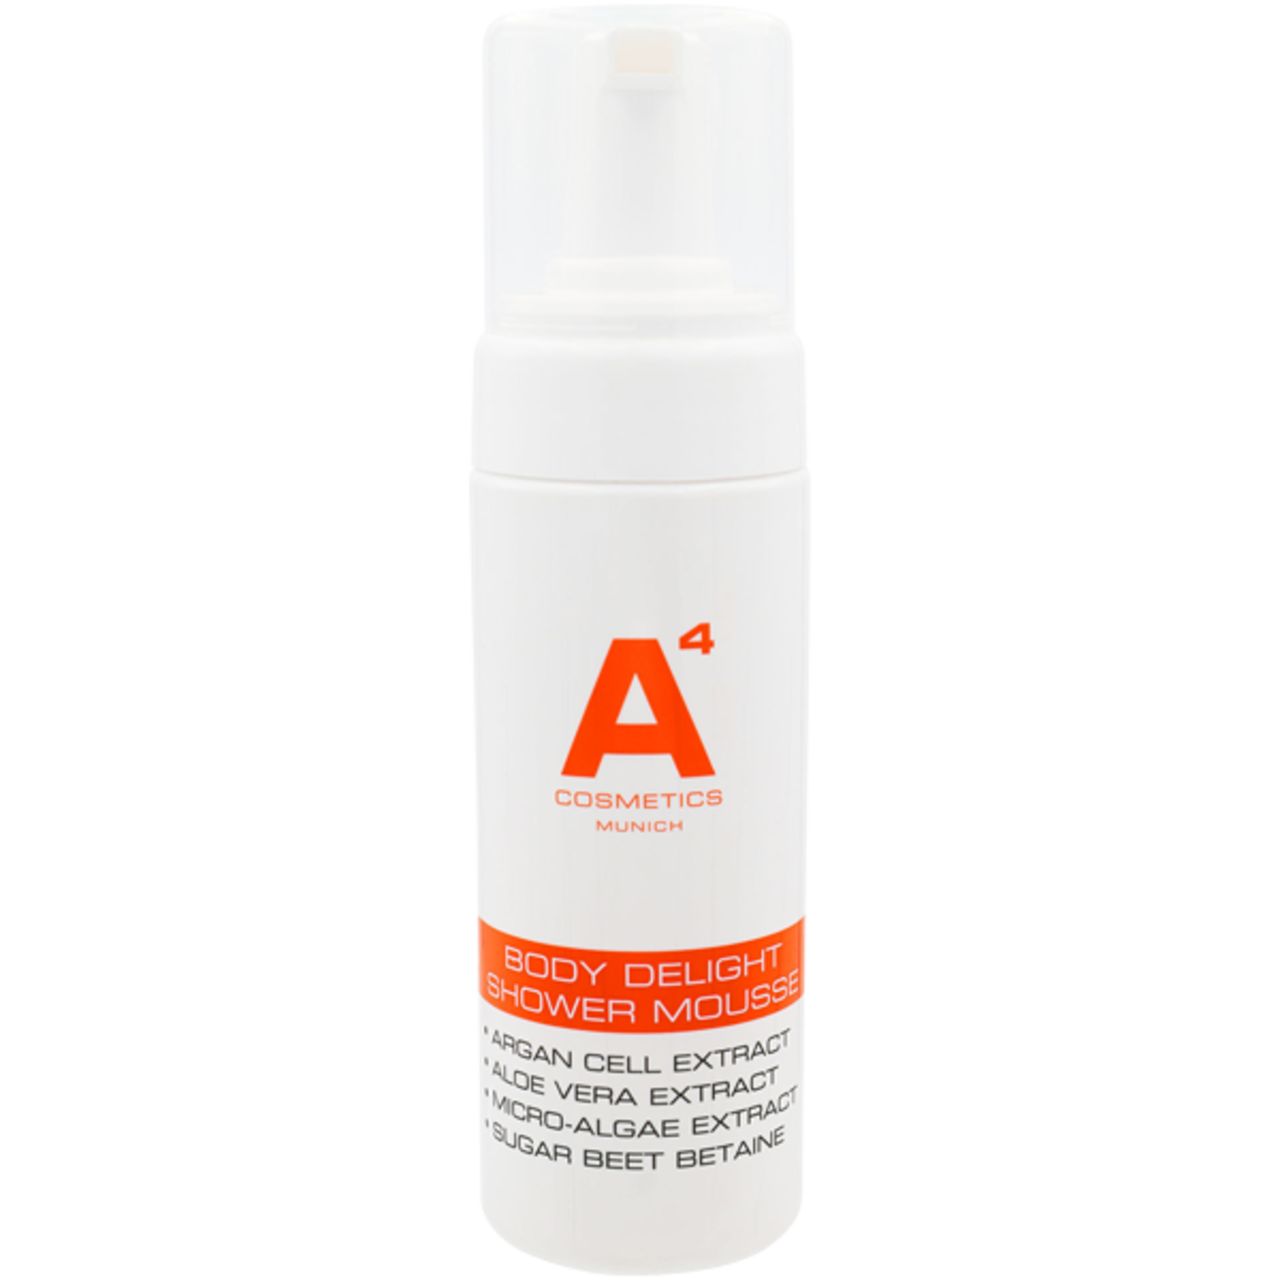 A4 Cosmetics, Body Delight Shower Mousse